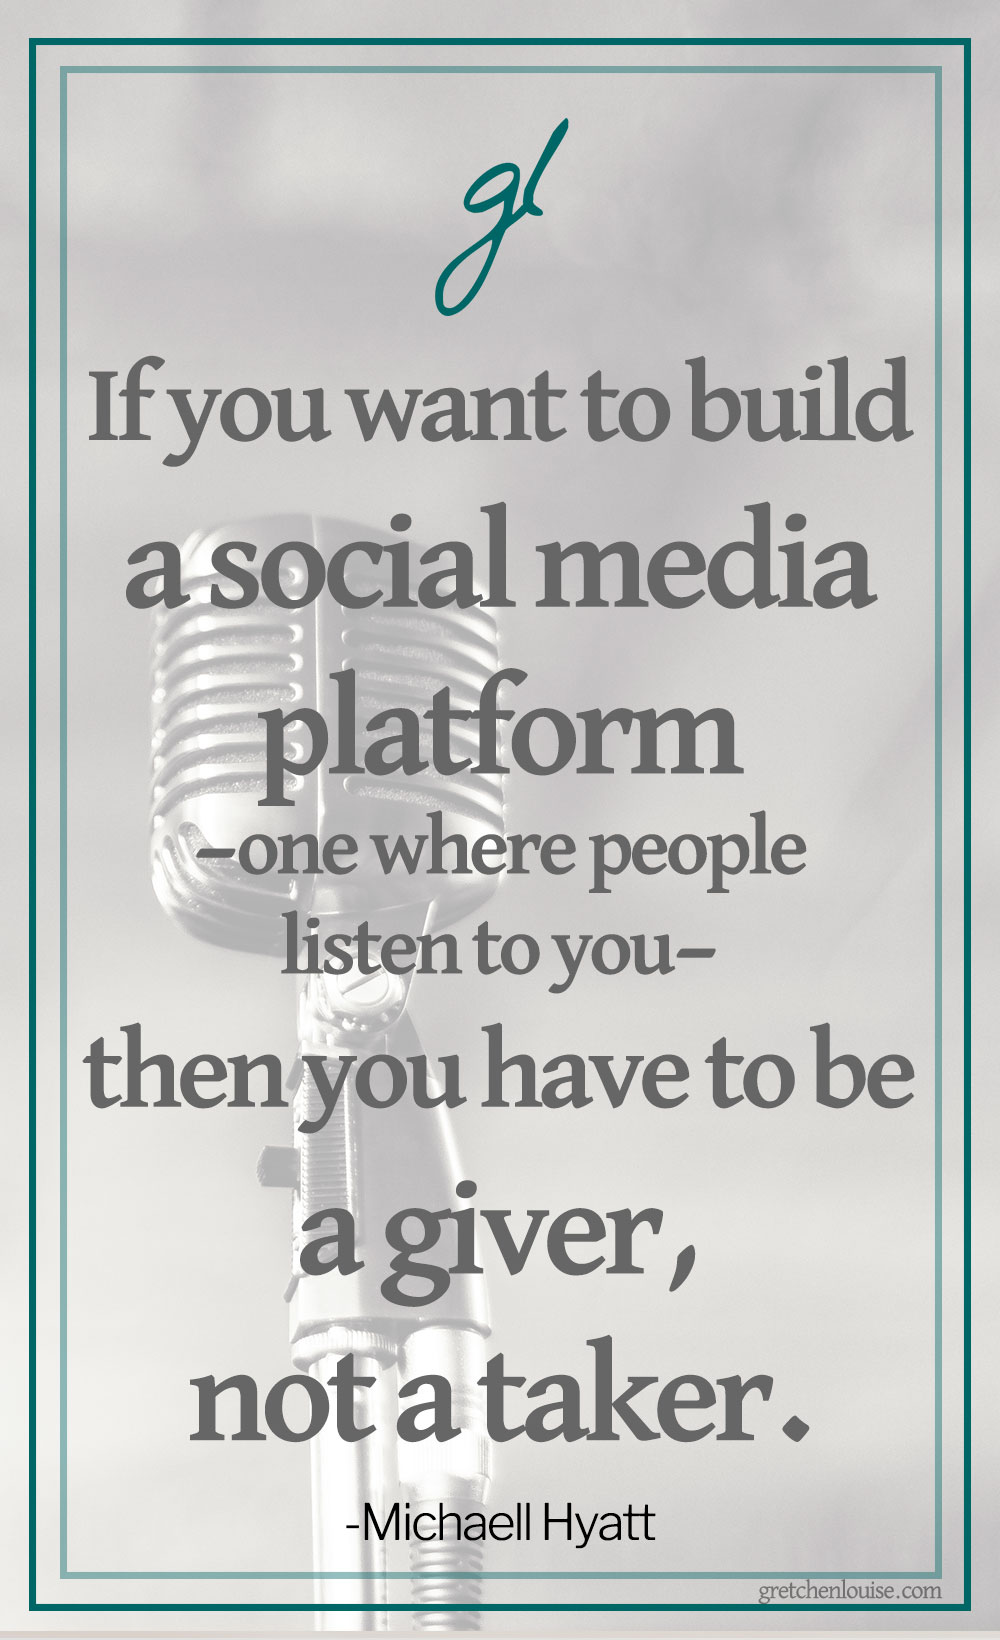 Michael Hyatt's book, Platform: Get Noticed in a Noisy World, is a fabulous tool for anyone who is in business or social media. via @GretLouise